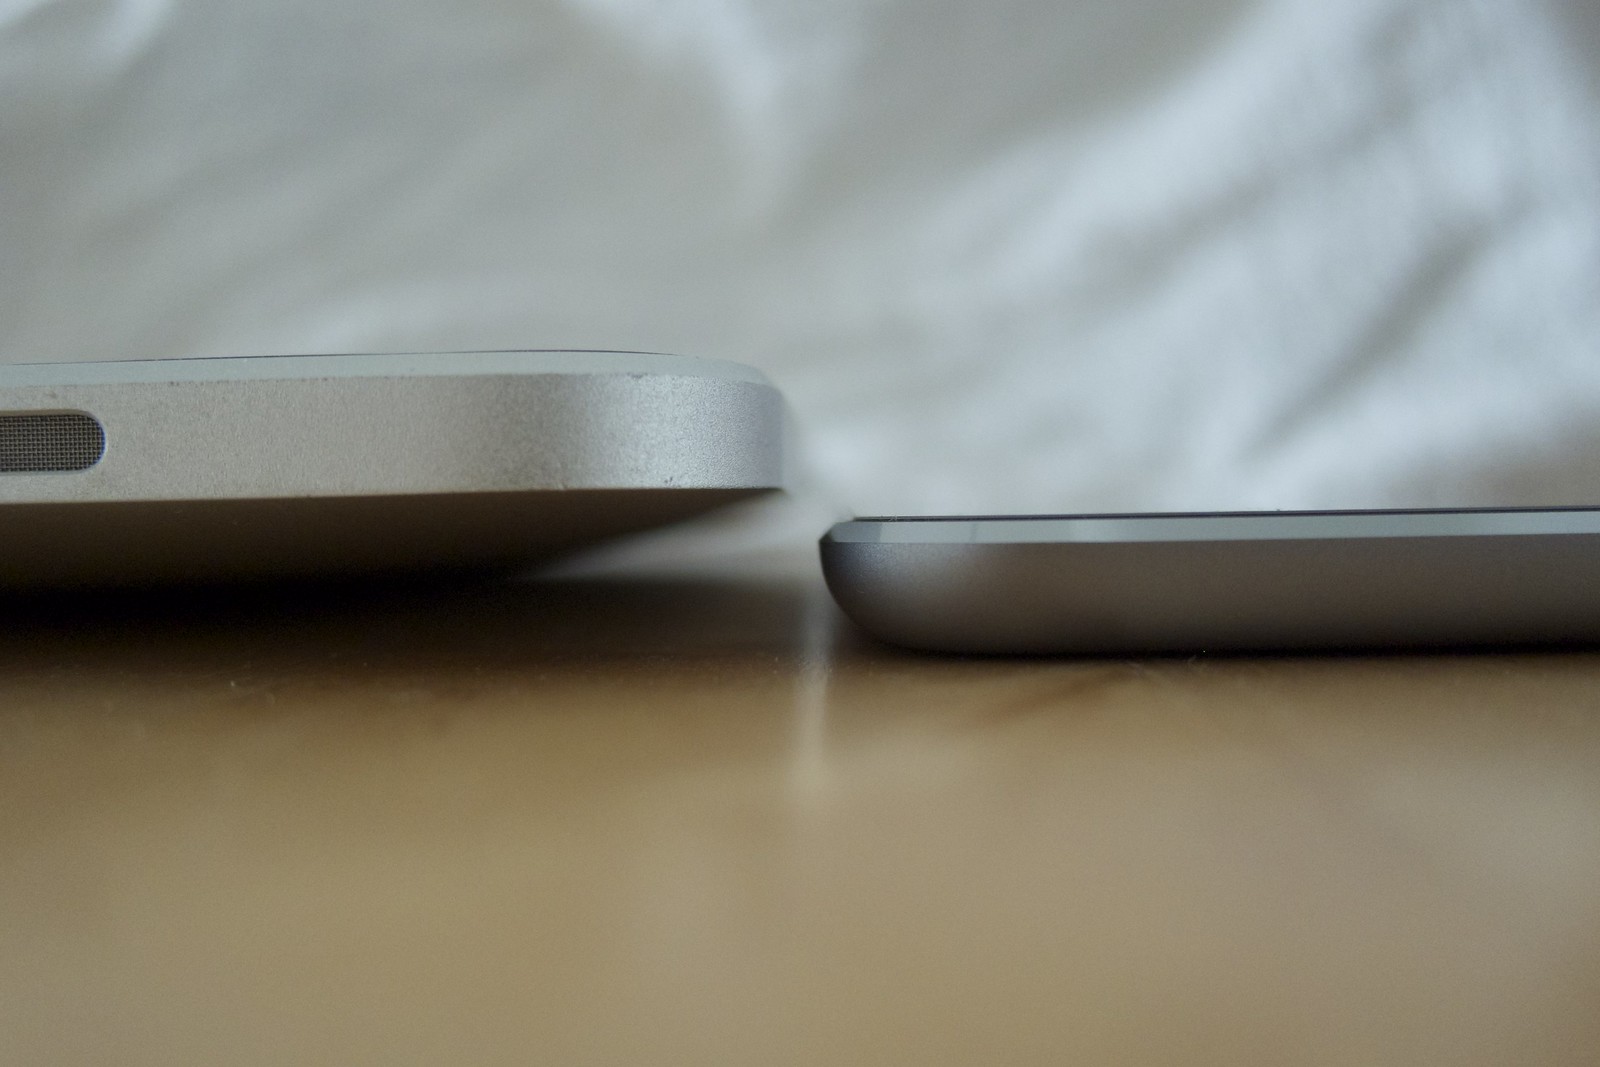 Thickness of iPad Air 2 and iPad(1st Gen).